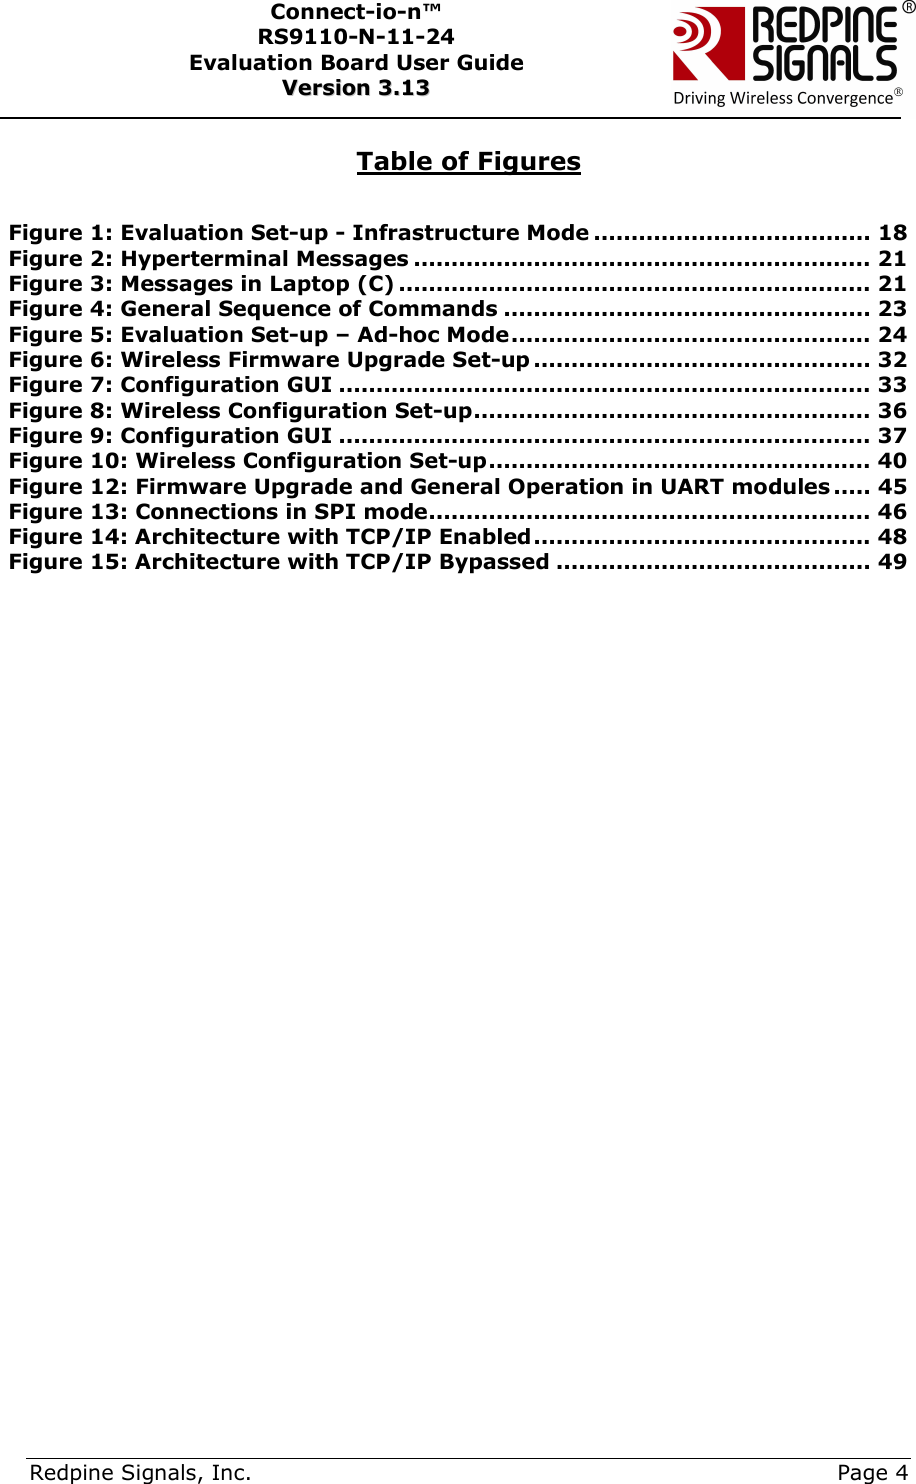      Redpine Signals, Inc.     Page 4 Connect-io-n™ RS9110-N-11-24  Evaluation Board User Guide  VVeerrssiioonn  33..1133     Table of Figures  Figure 1: Evaluation Set-up - Infrastructure Mode ..................................... 18 Figure 2: Hyperterminal Messages ............................................................. 21 Figure 3: Messages in Laptop (C) ............................................................... 21 Figure 4: General Sequence of Commands ................................................. 23 Figure 5: Evaluation Set-up – Ad-hoc Mode ................................................ 24 Figure 6: Wireless Firmware Upgrade Set-up ............................................. 32 Figure 7: Configuration GUI ....................................................................... 33 Figure 8: Wireless Configuration Set-up ..................................................... 36 Figure 9: Configuration GUI ....................................................................... 37 Figure 10: Wireless Configuration Set-up ................................................... 40 Figure 12: Firmware Upgrade and General Operation in UART modules ..... 45 Figure 13: Connections in SPI mode ........................................................... 46 Figure 14: Architecture with TCP/IP Enabled ............................................. 48 Figure 15: Architecture with TCP/IP Bypassed .......................................... 49  